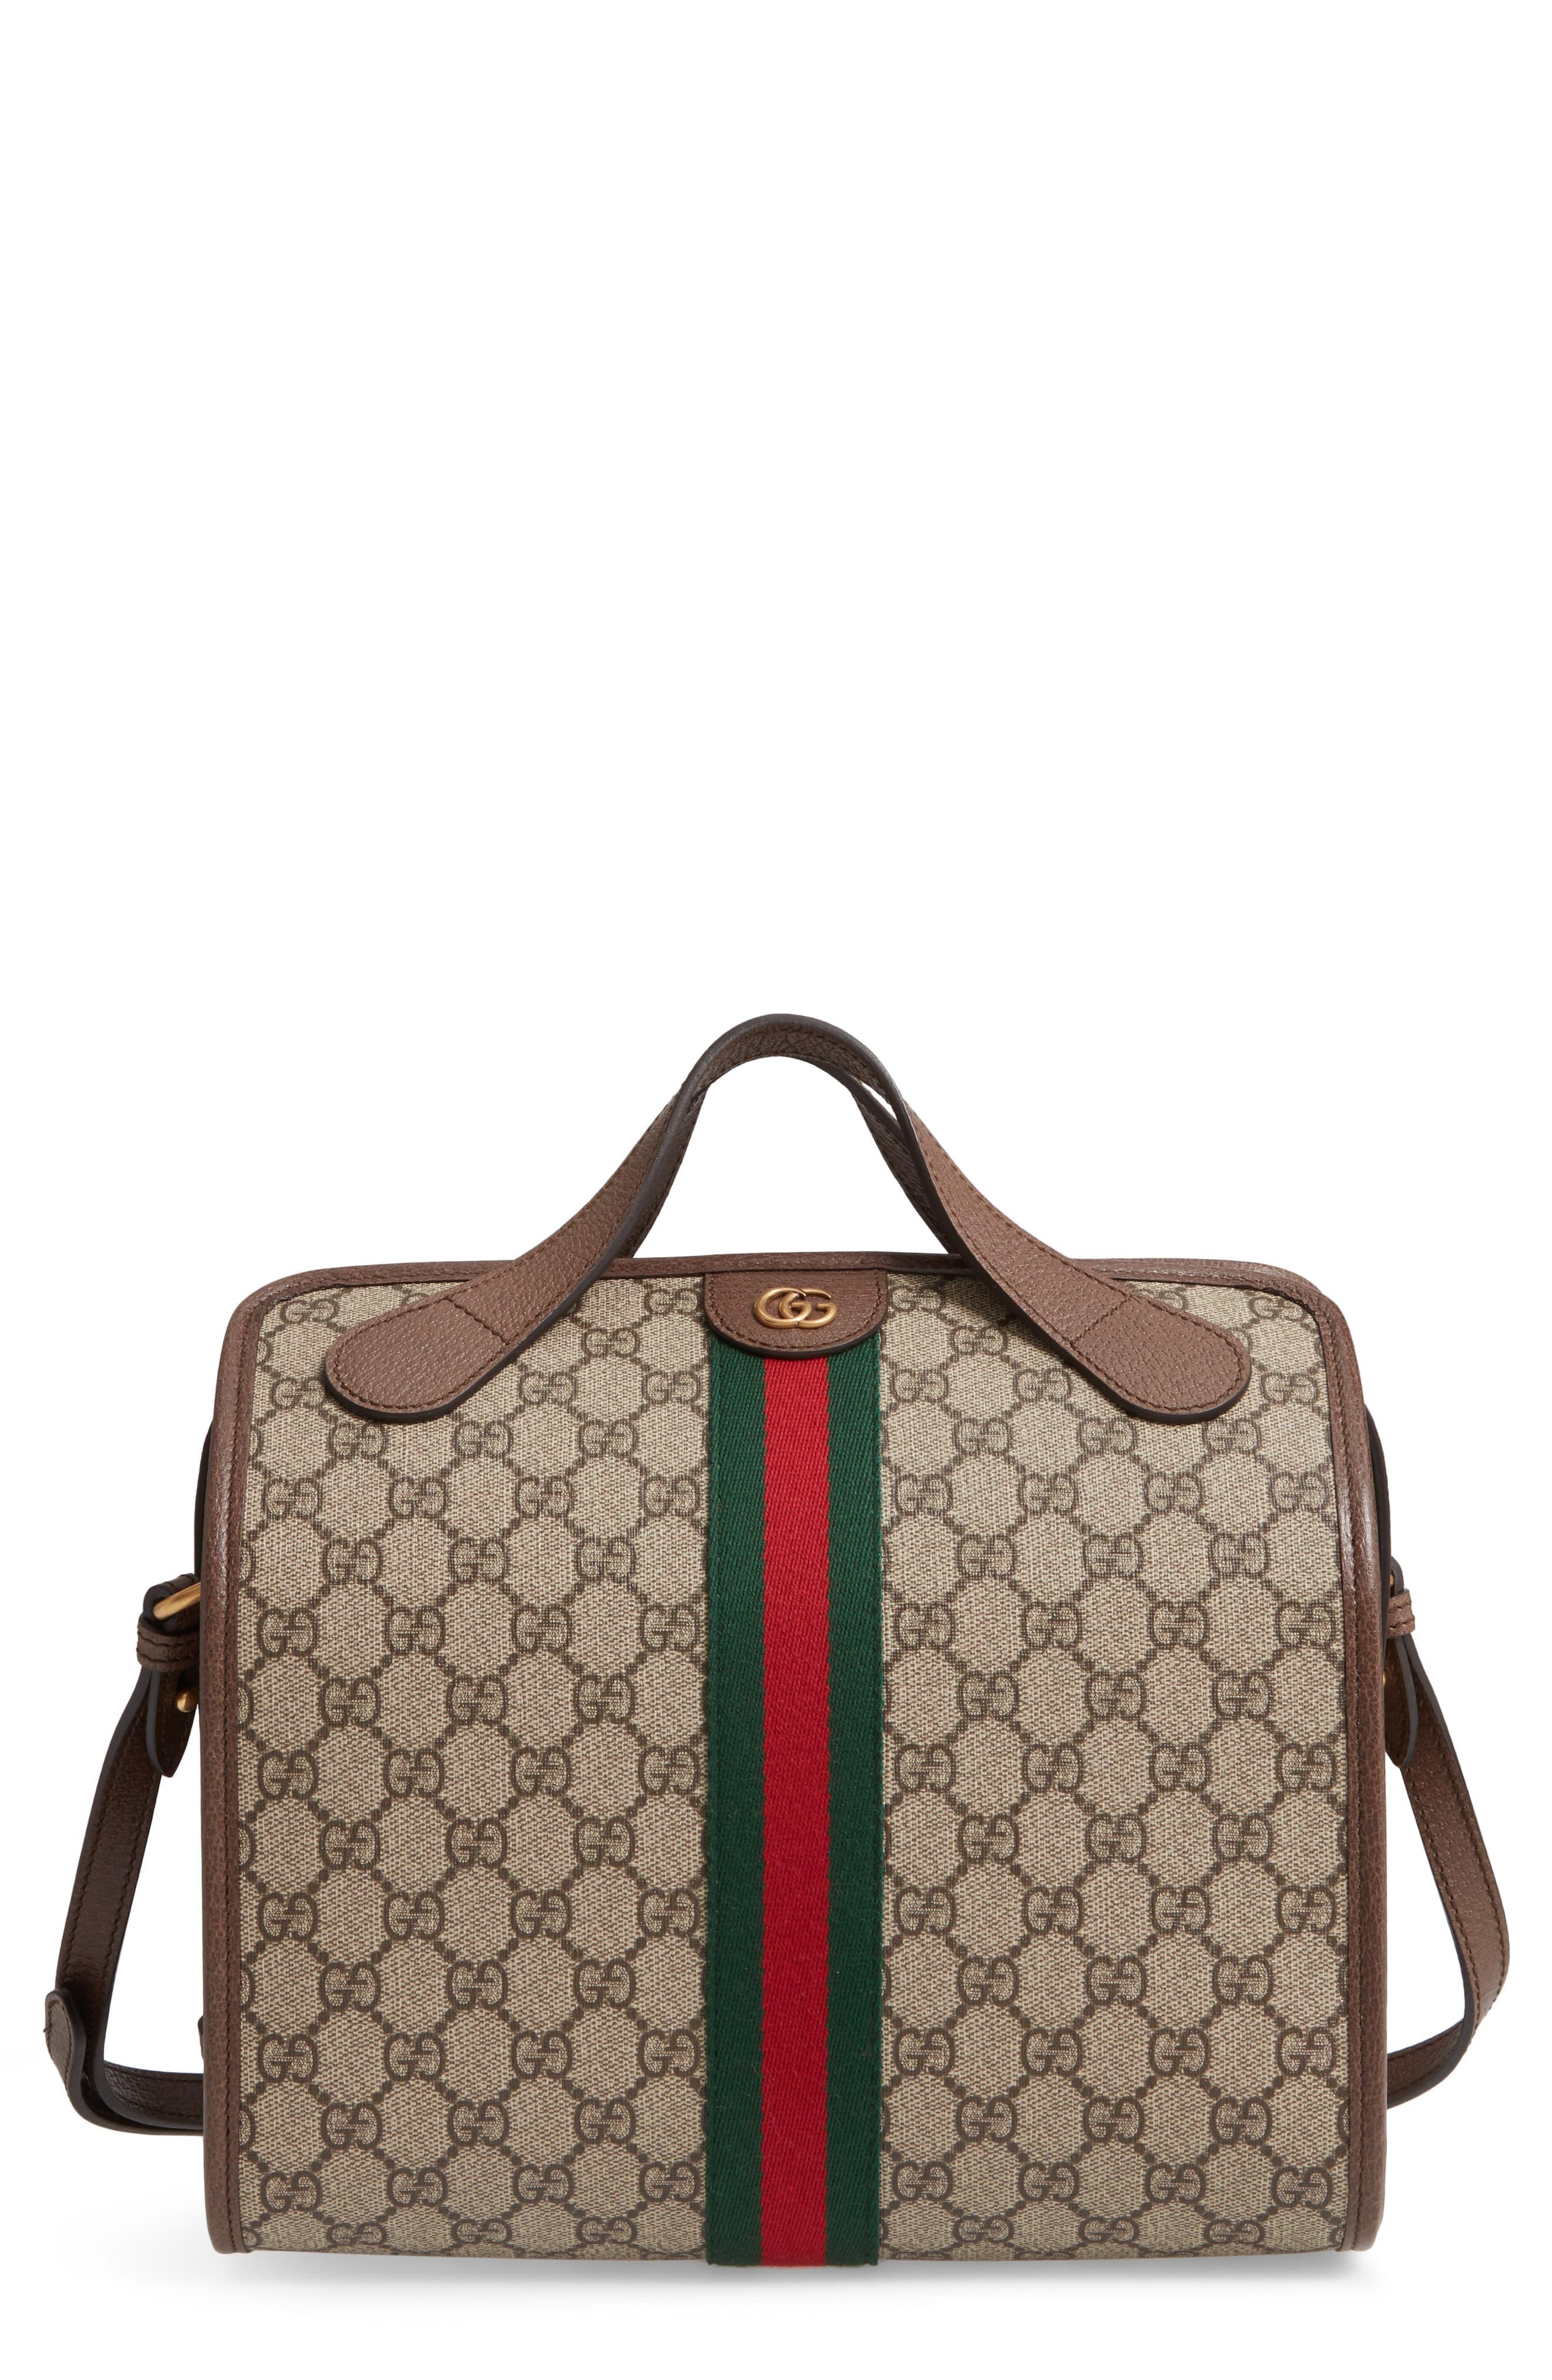 Gucci Small Leather Duffel Bag in Natural for Men - Lyst